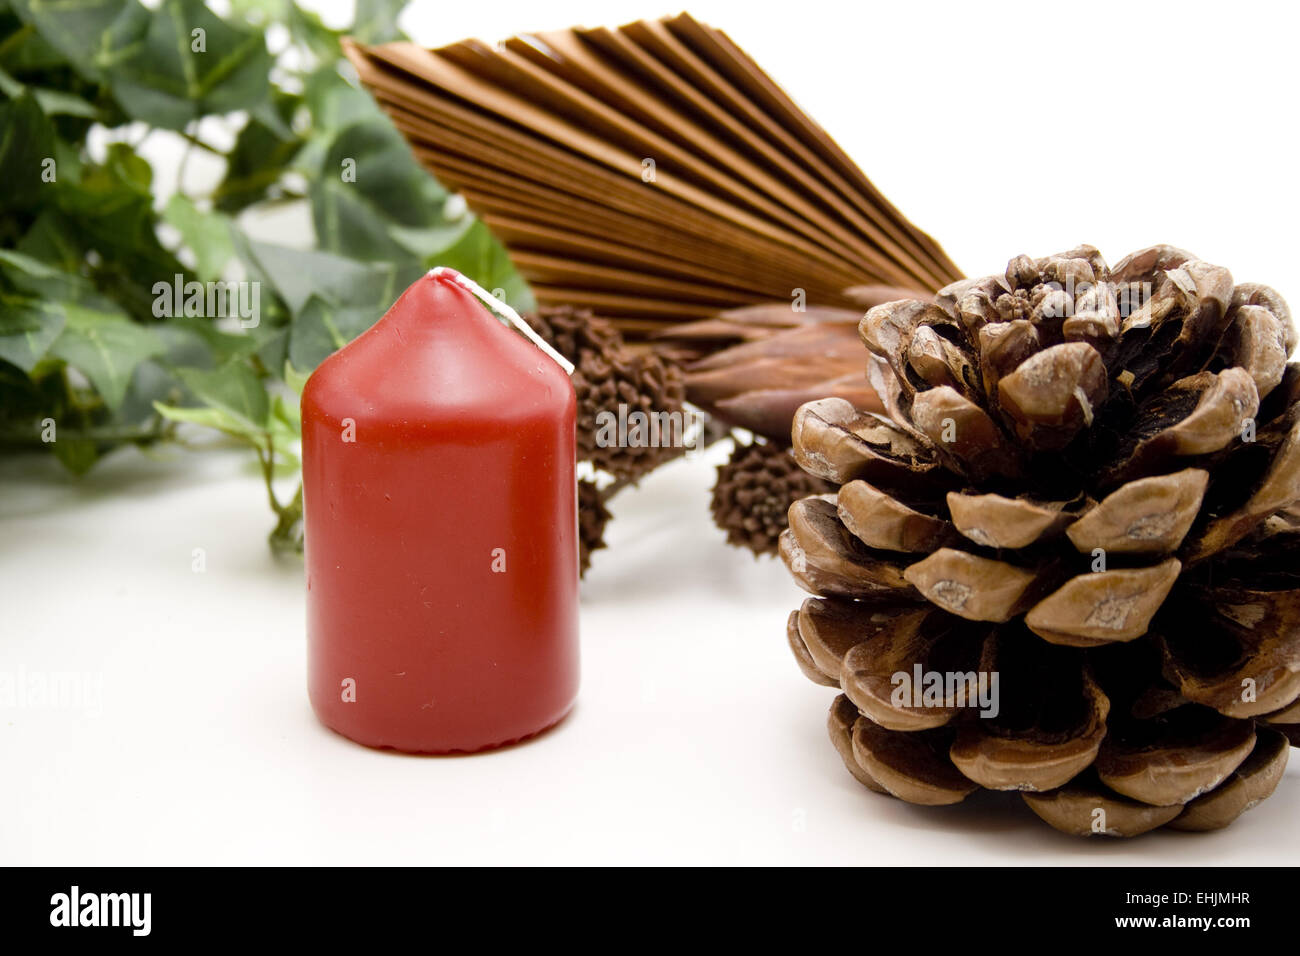 Pine cones and red candle Stock Photo